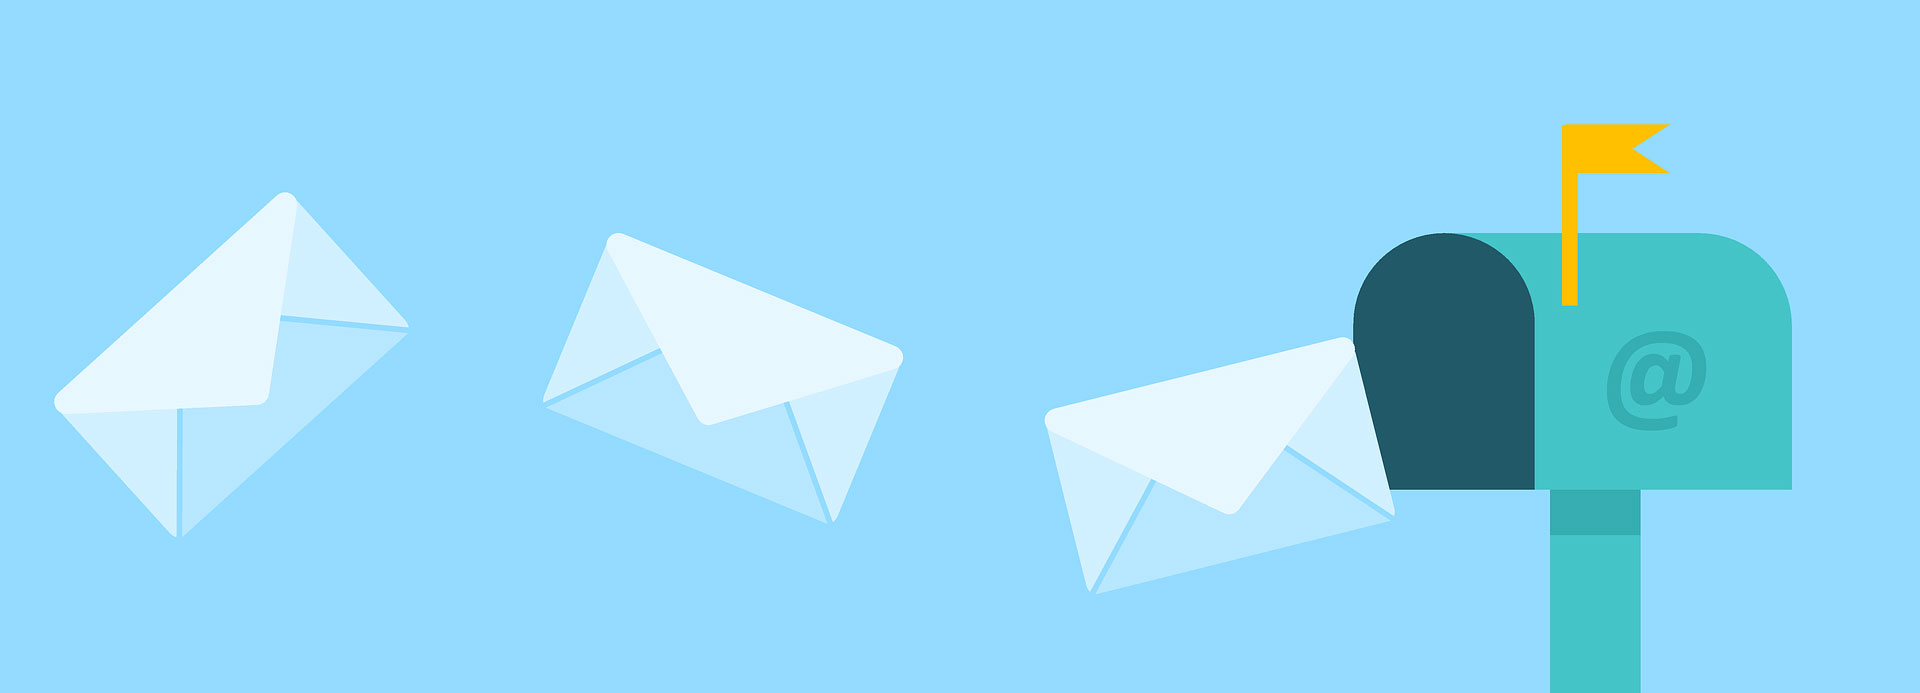 5 Tips to Build a Quality Email List from Scratch